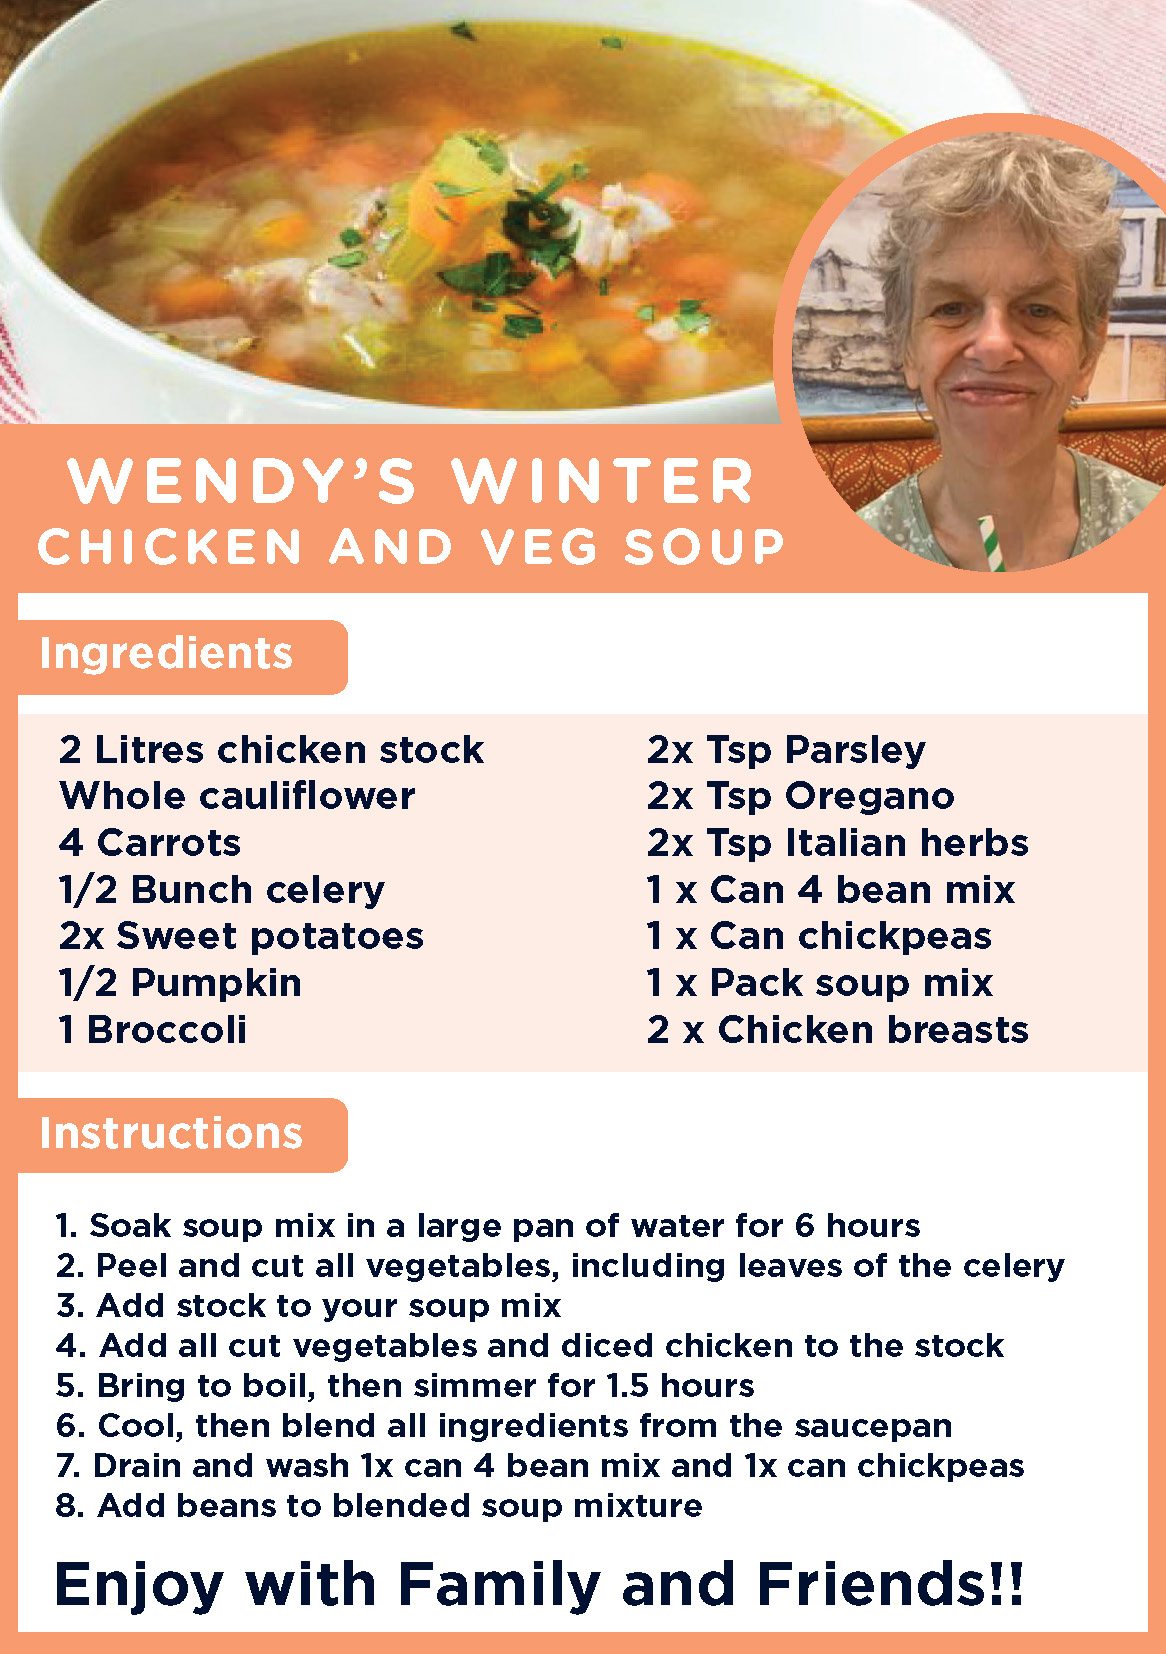 Recipe for Chicken and Veg soup